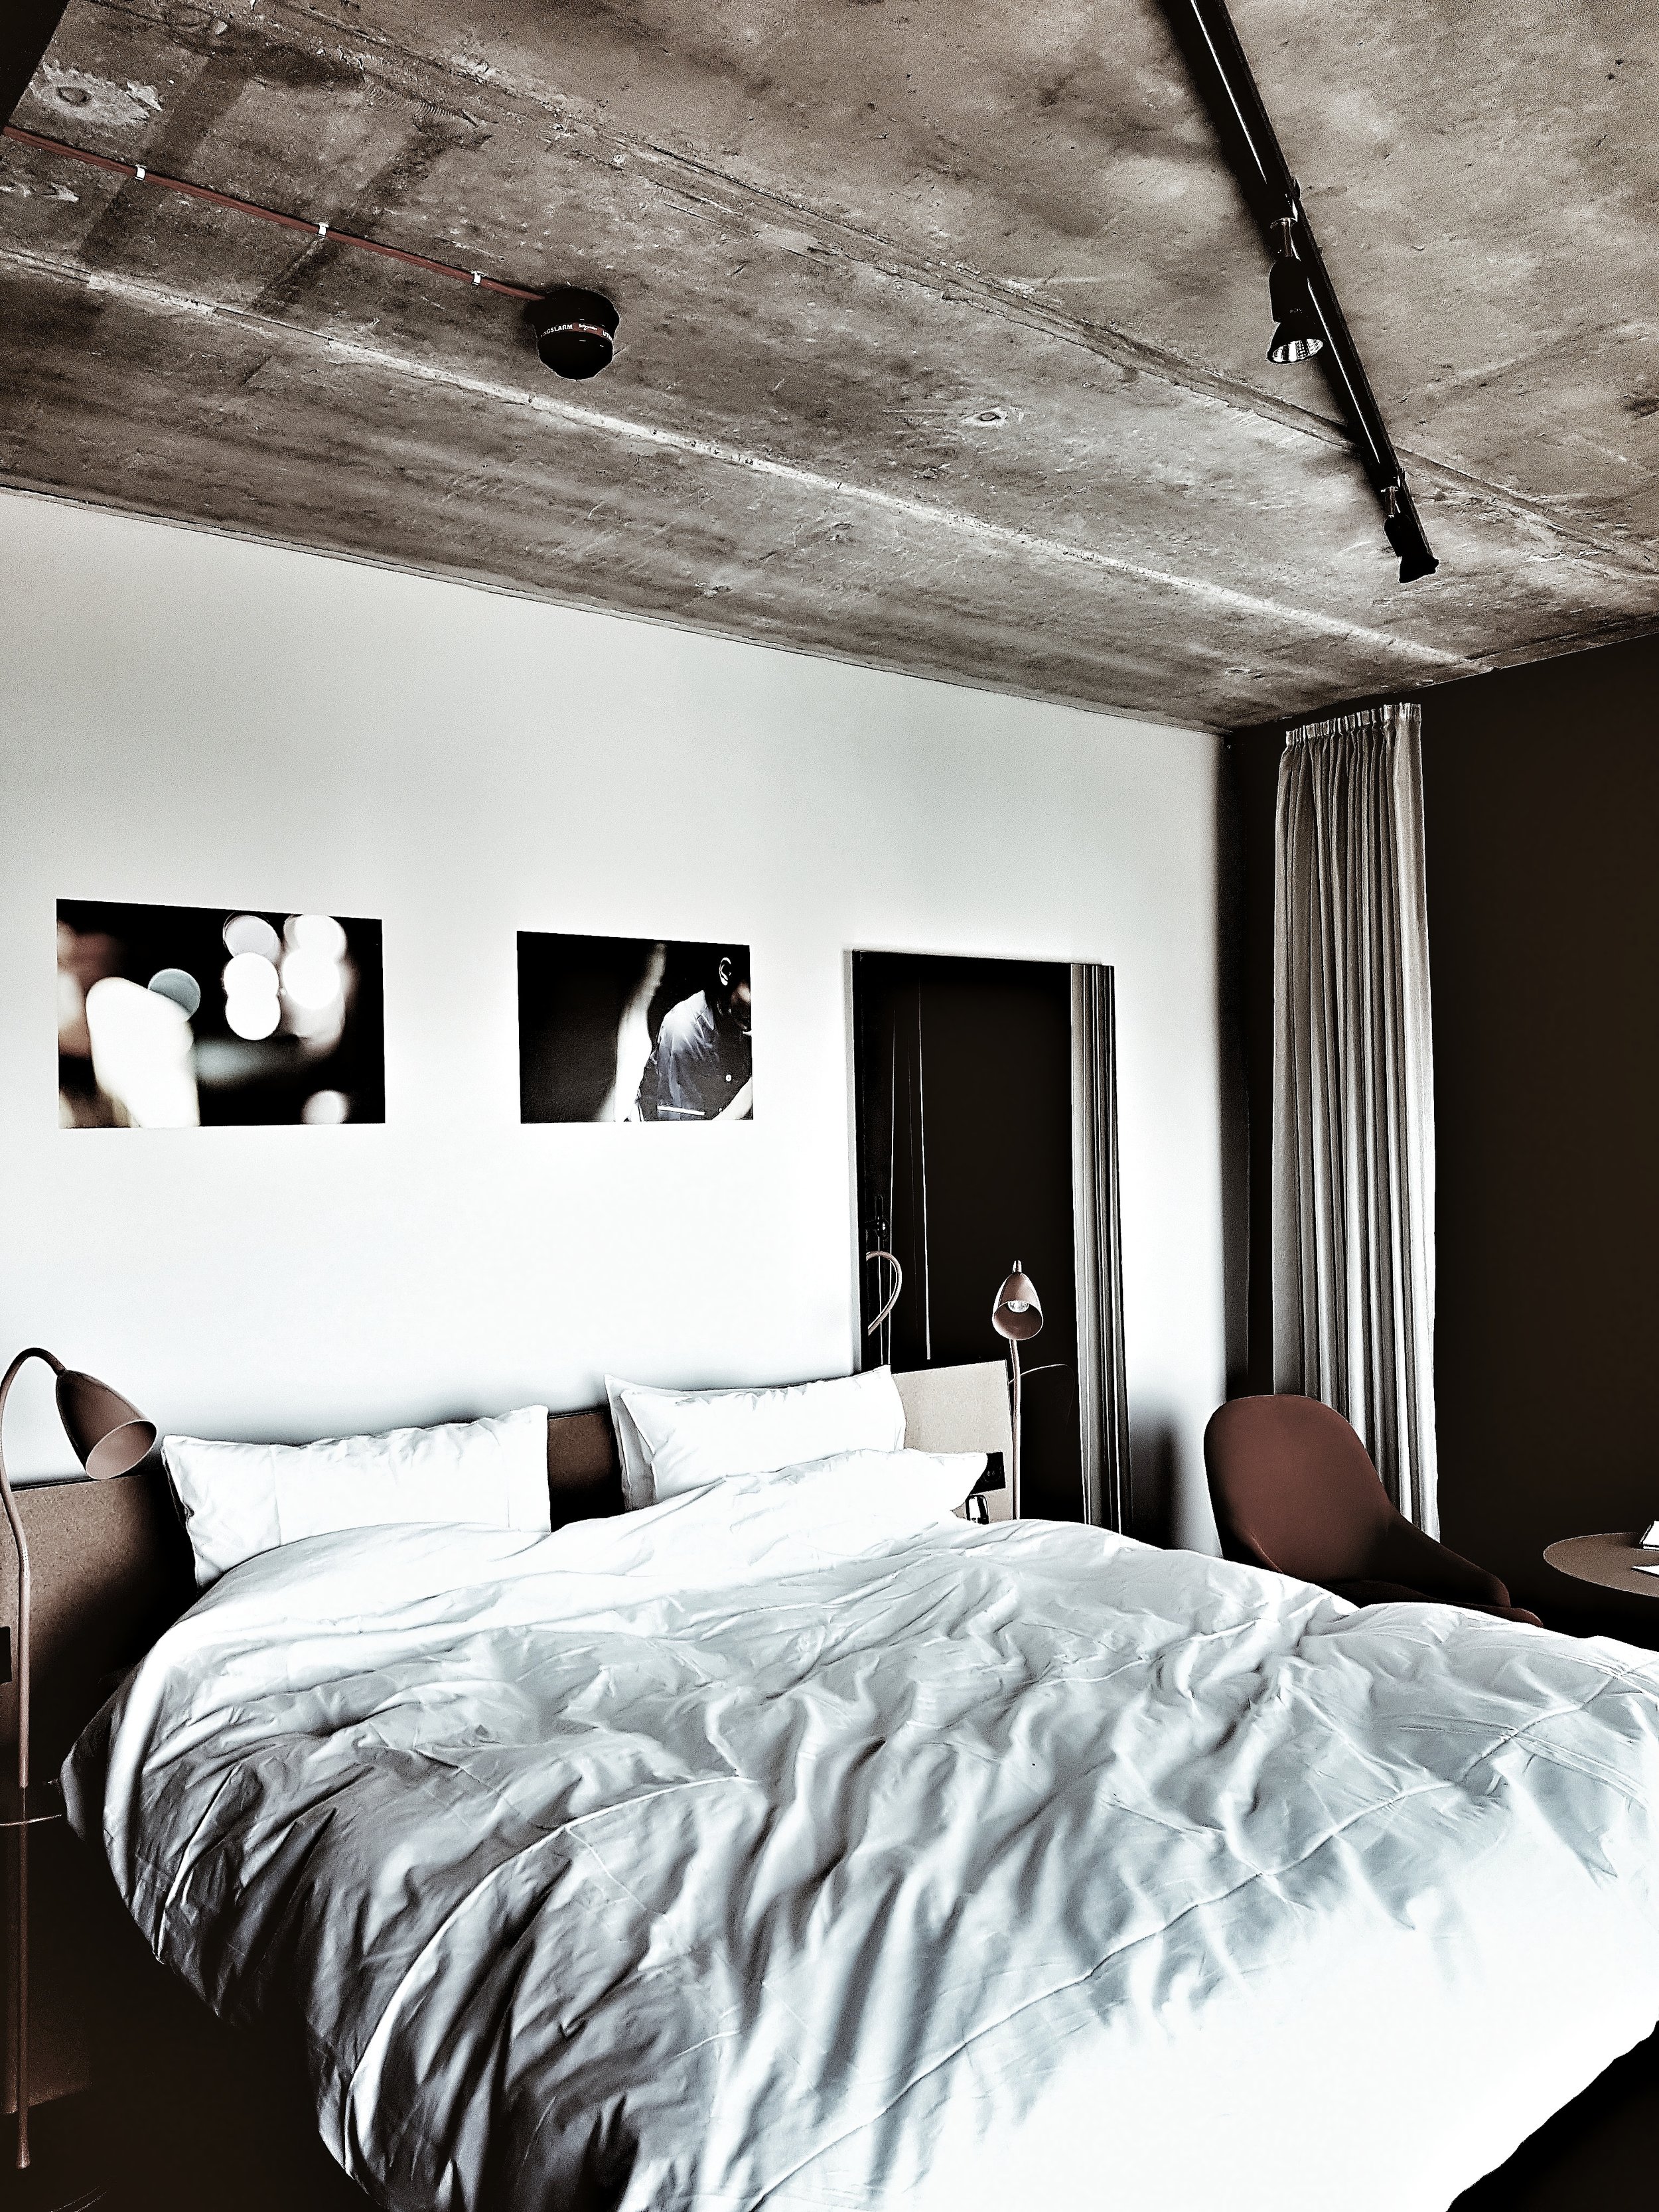 Story Hotel - 91 Magazine Instagrammer's guide to Malmo